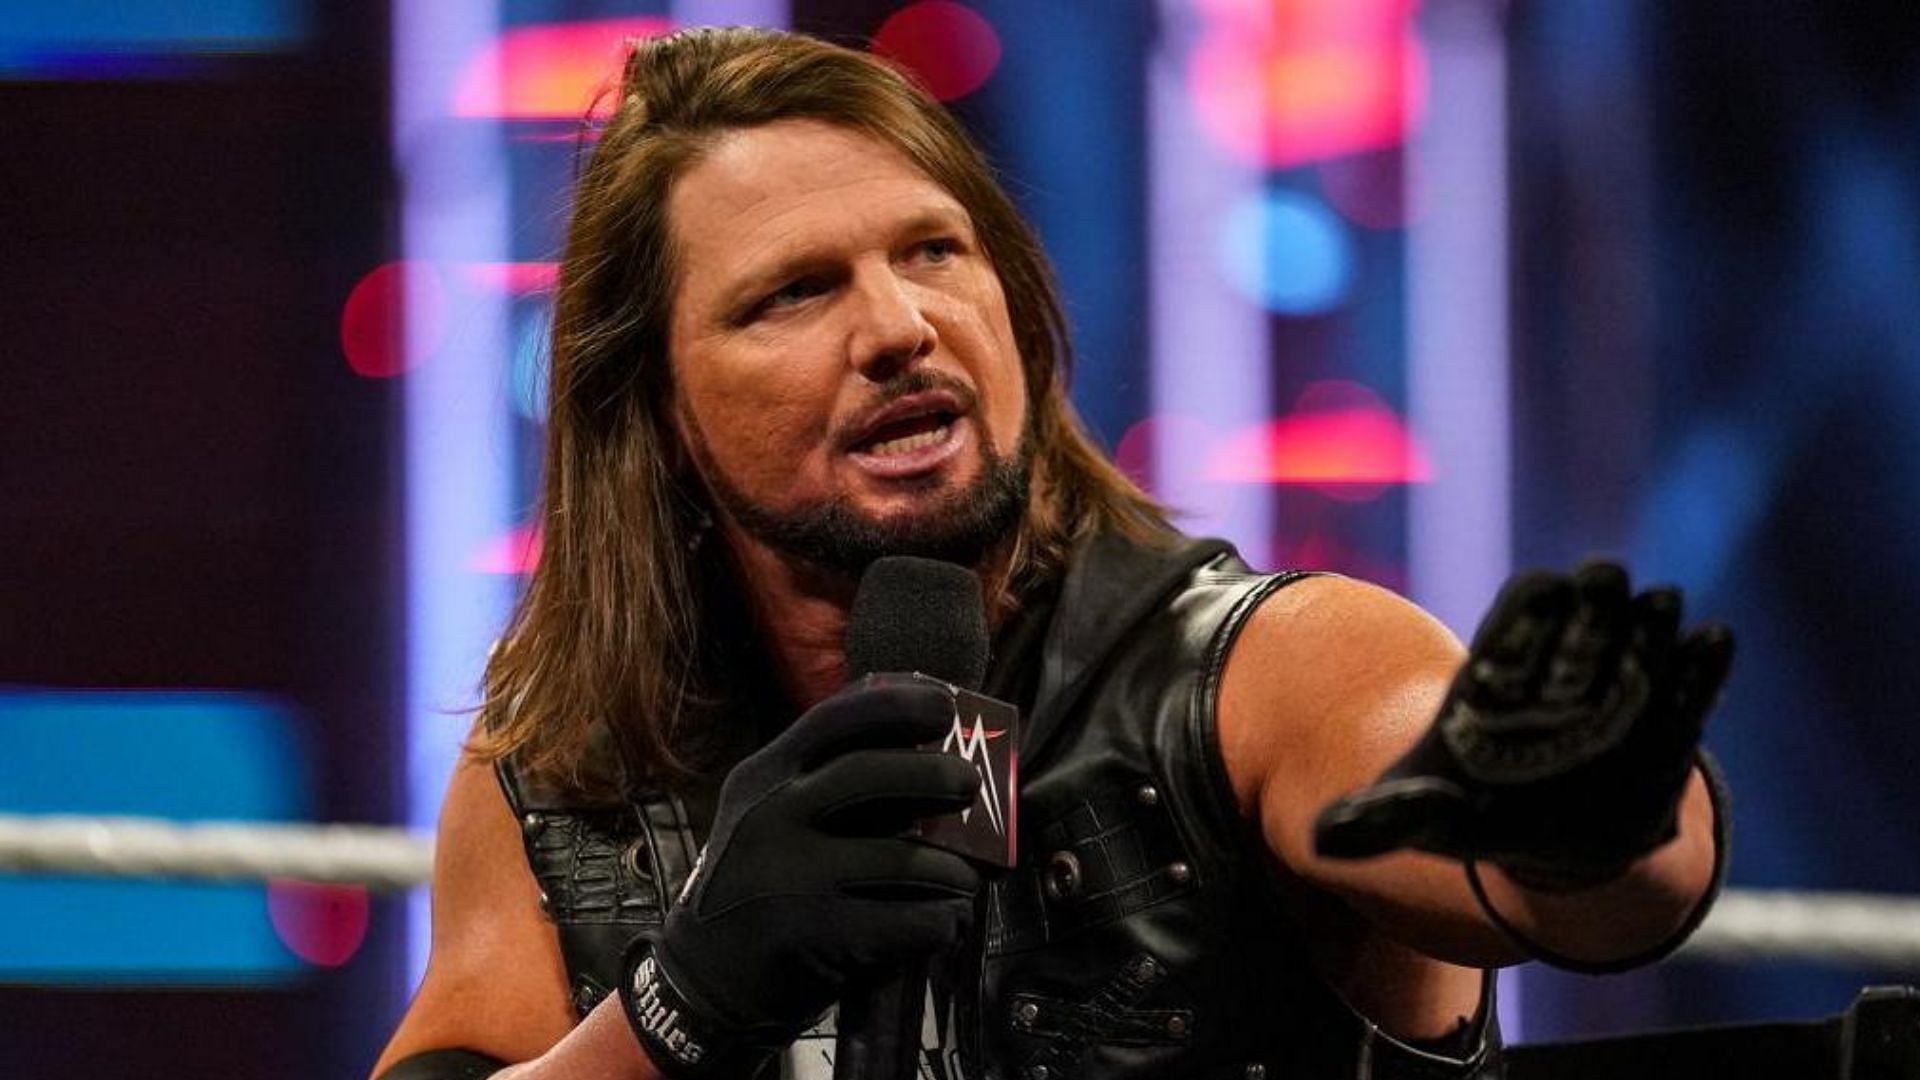 AJ Styles recently lost to Seth Rollins at the Night of Champions